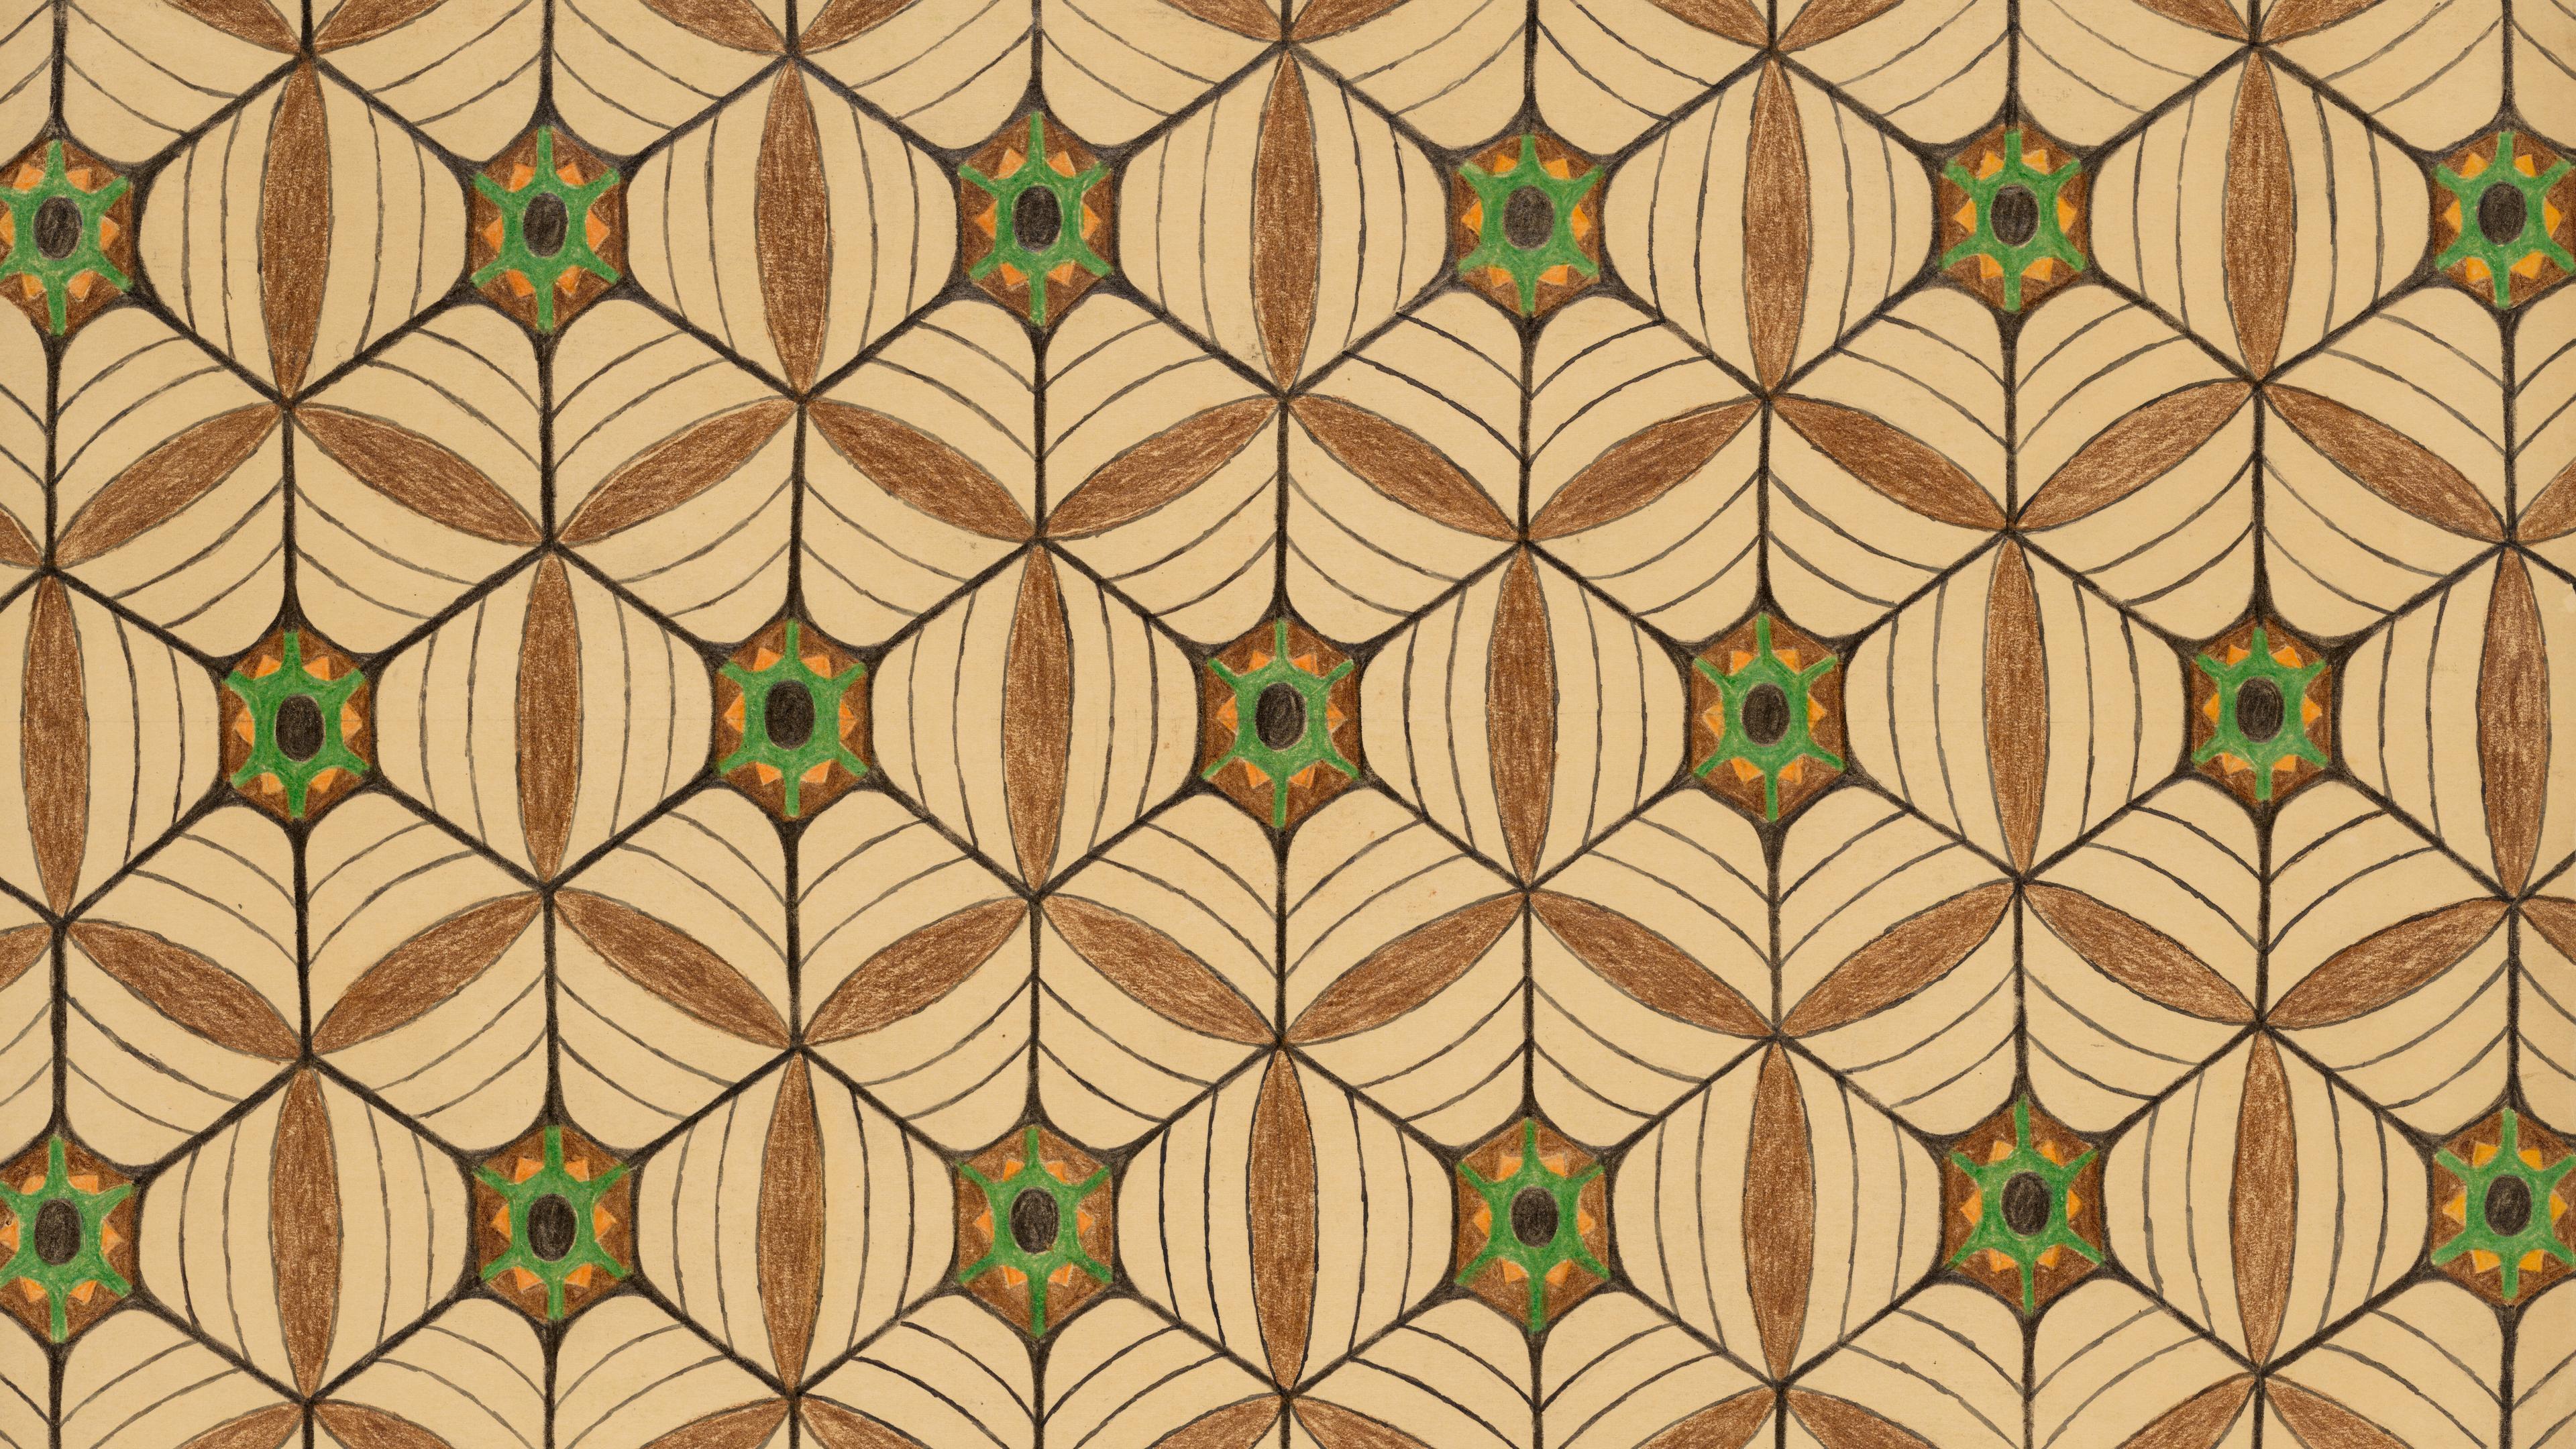 A detailed geometric tile pattern featuring leaf-like shapes in tan and white hues with green and brown accents creating a repetitive, symmetrical design. elements form star and cross shapes at the intersections.